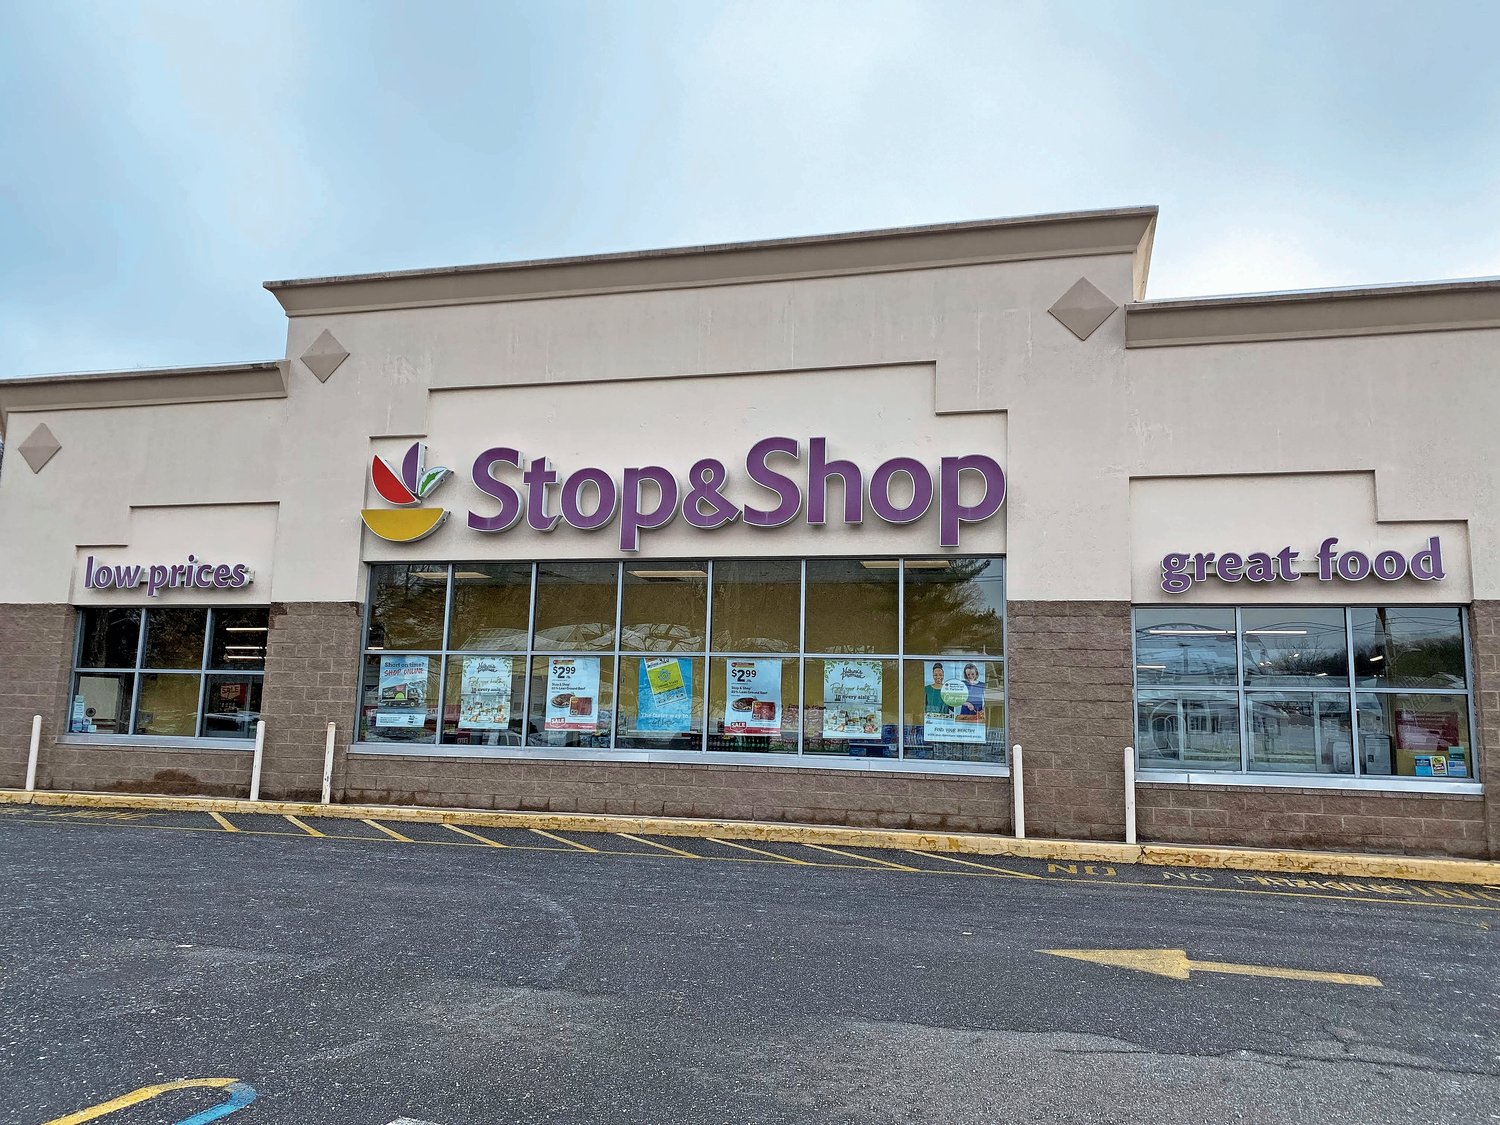 The Oyster Bay Stop & Shop will be closing its doors from July 14 to Aug. 12 while making upgrades and renovations to their interior.